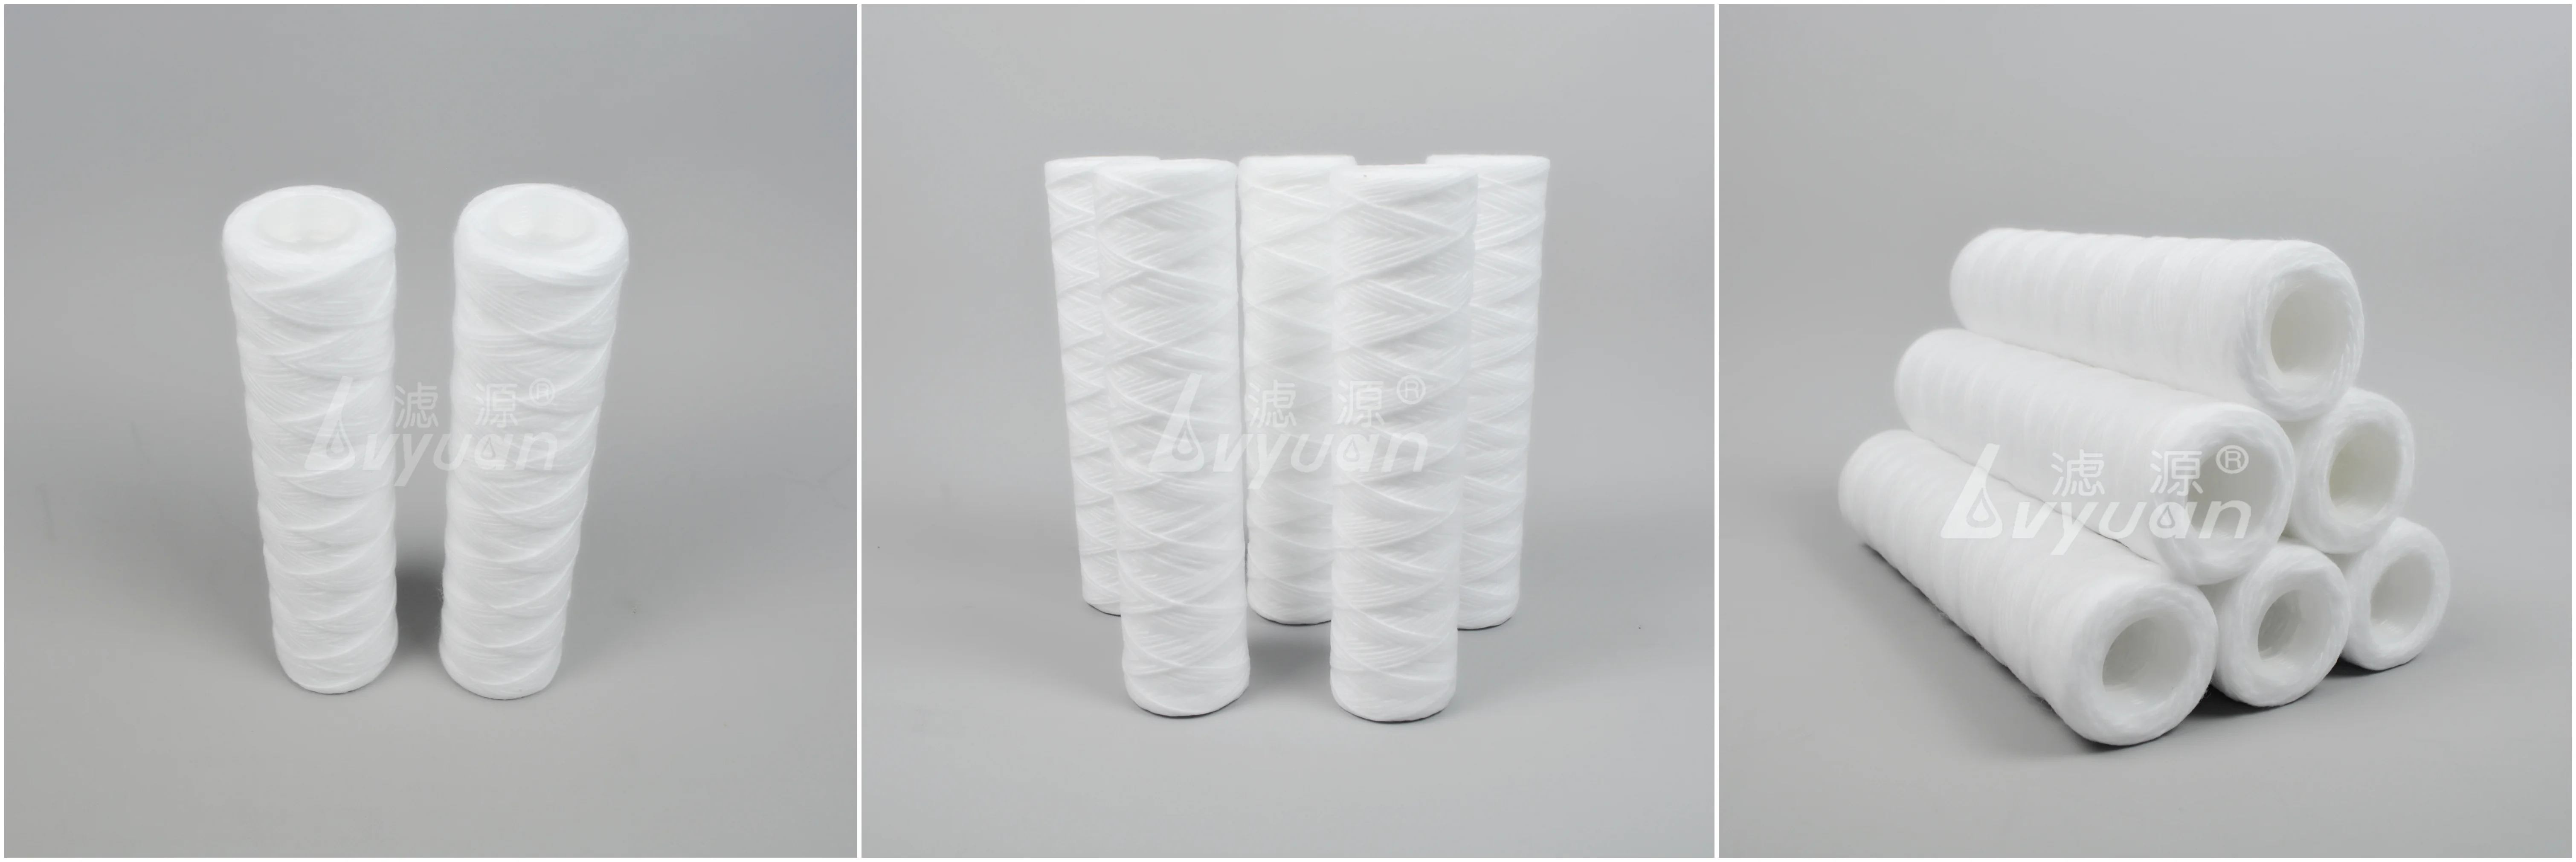 Lvyuan string wound filter wholesaler for water purification-10